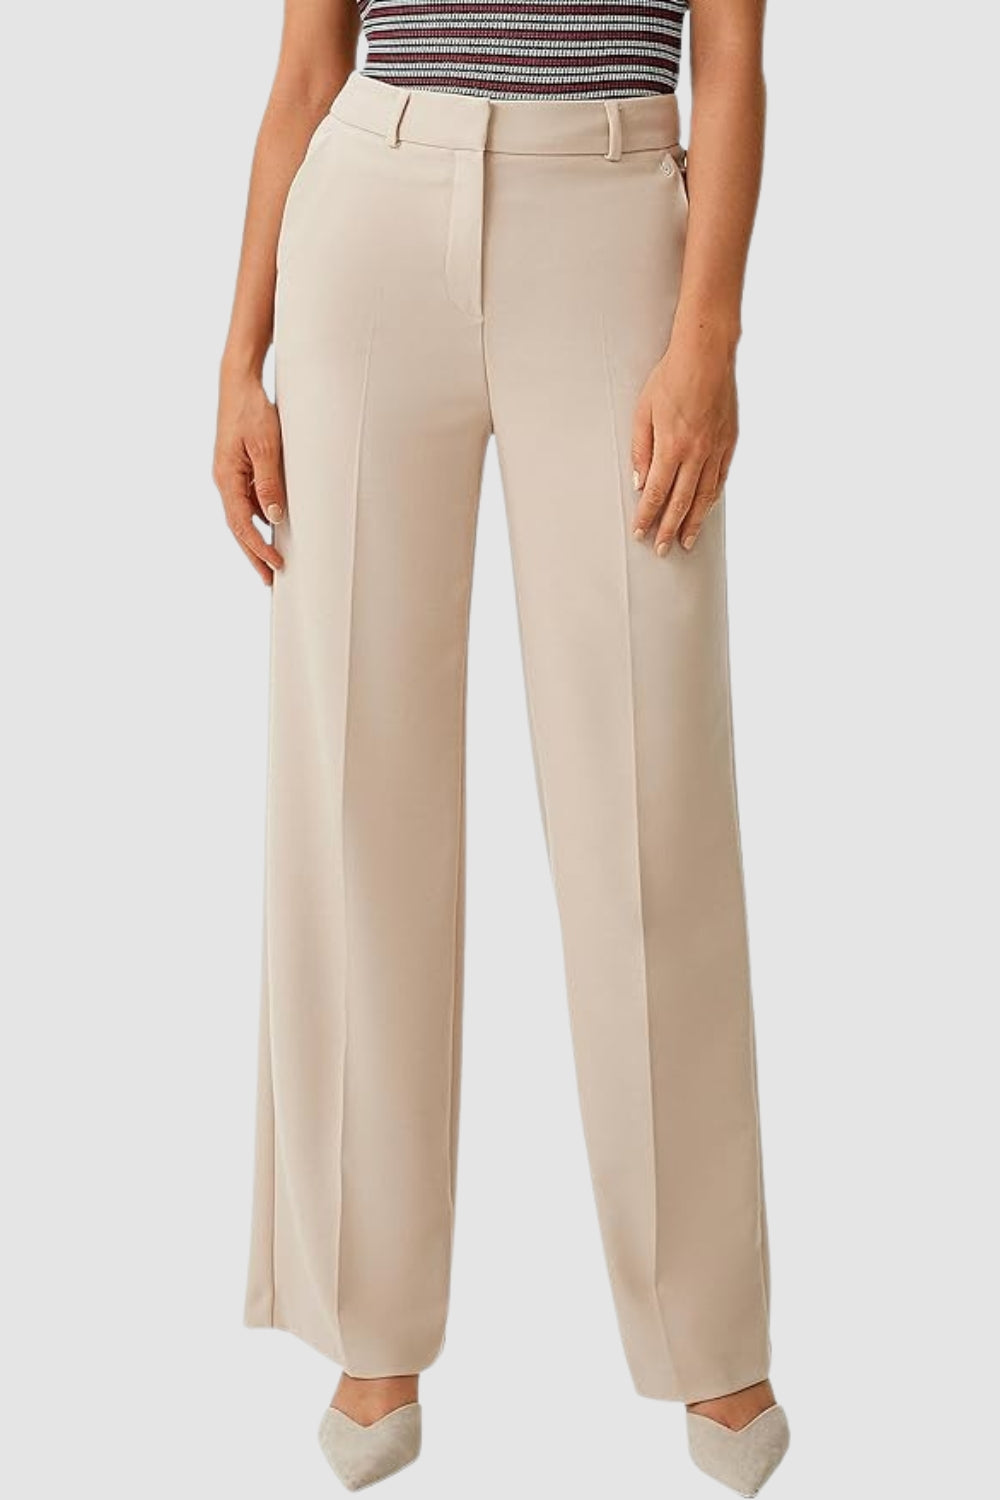 Showy Pocket Trousers